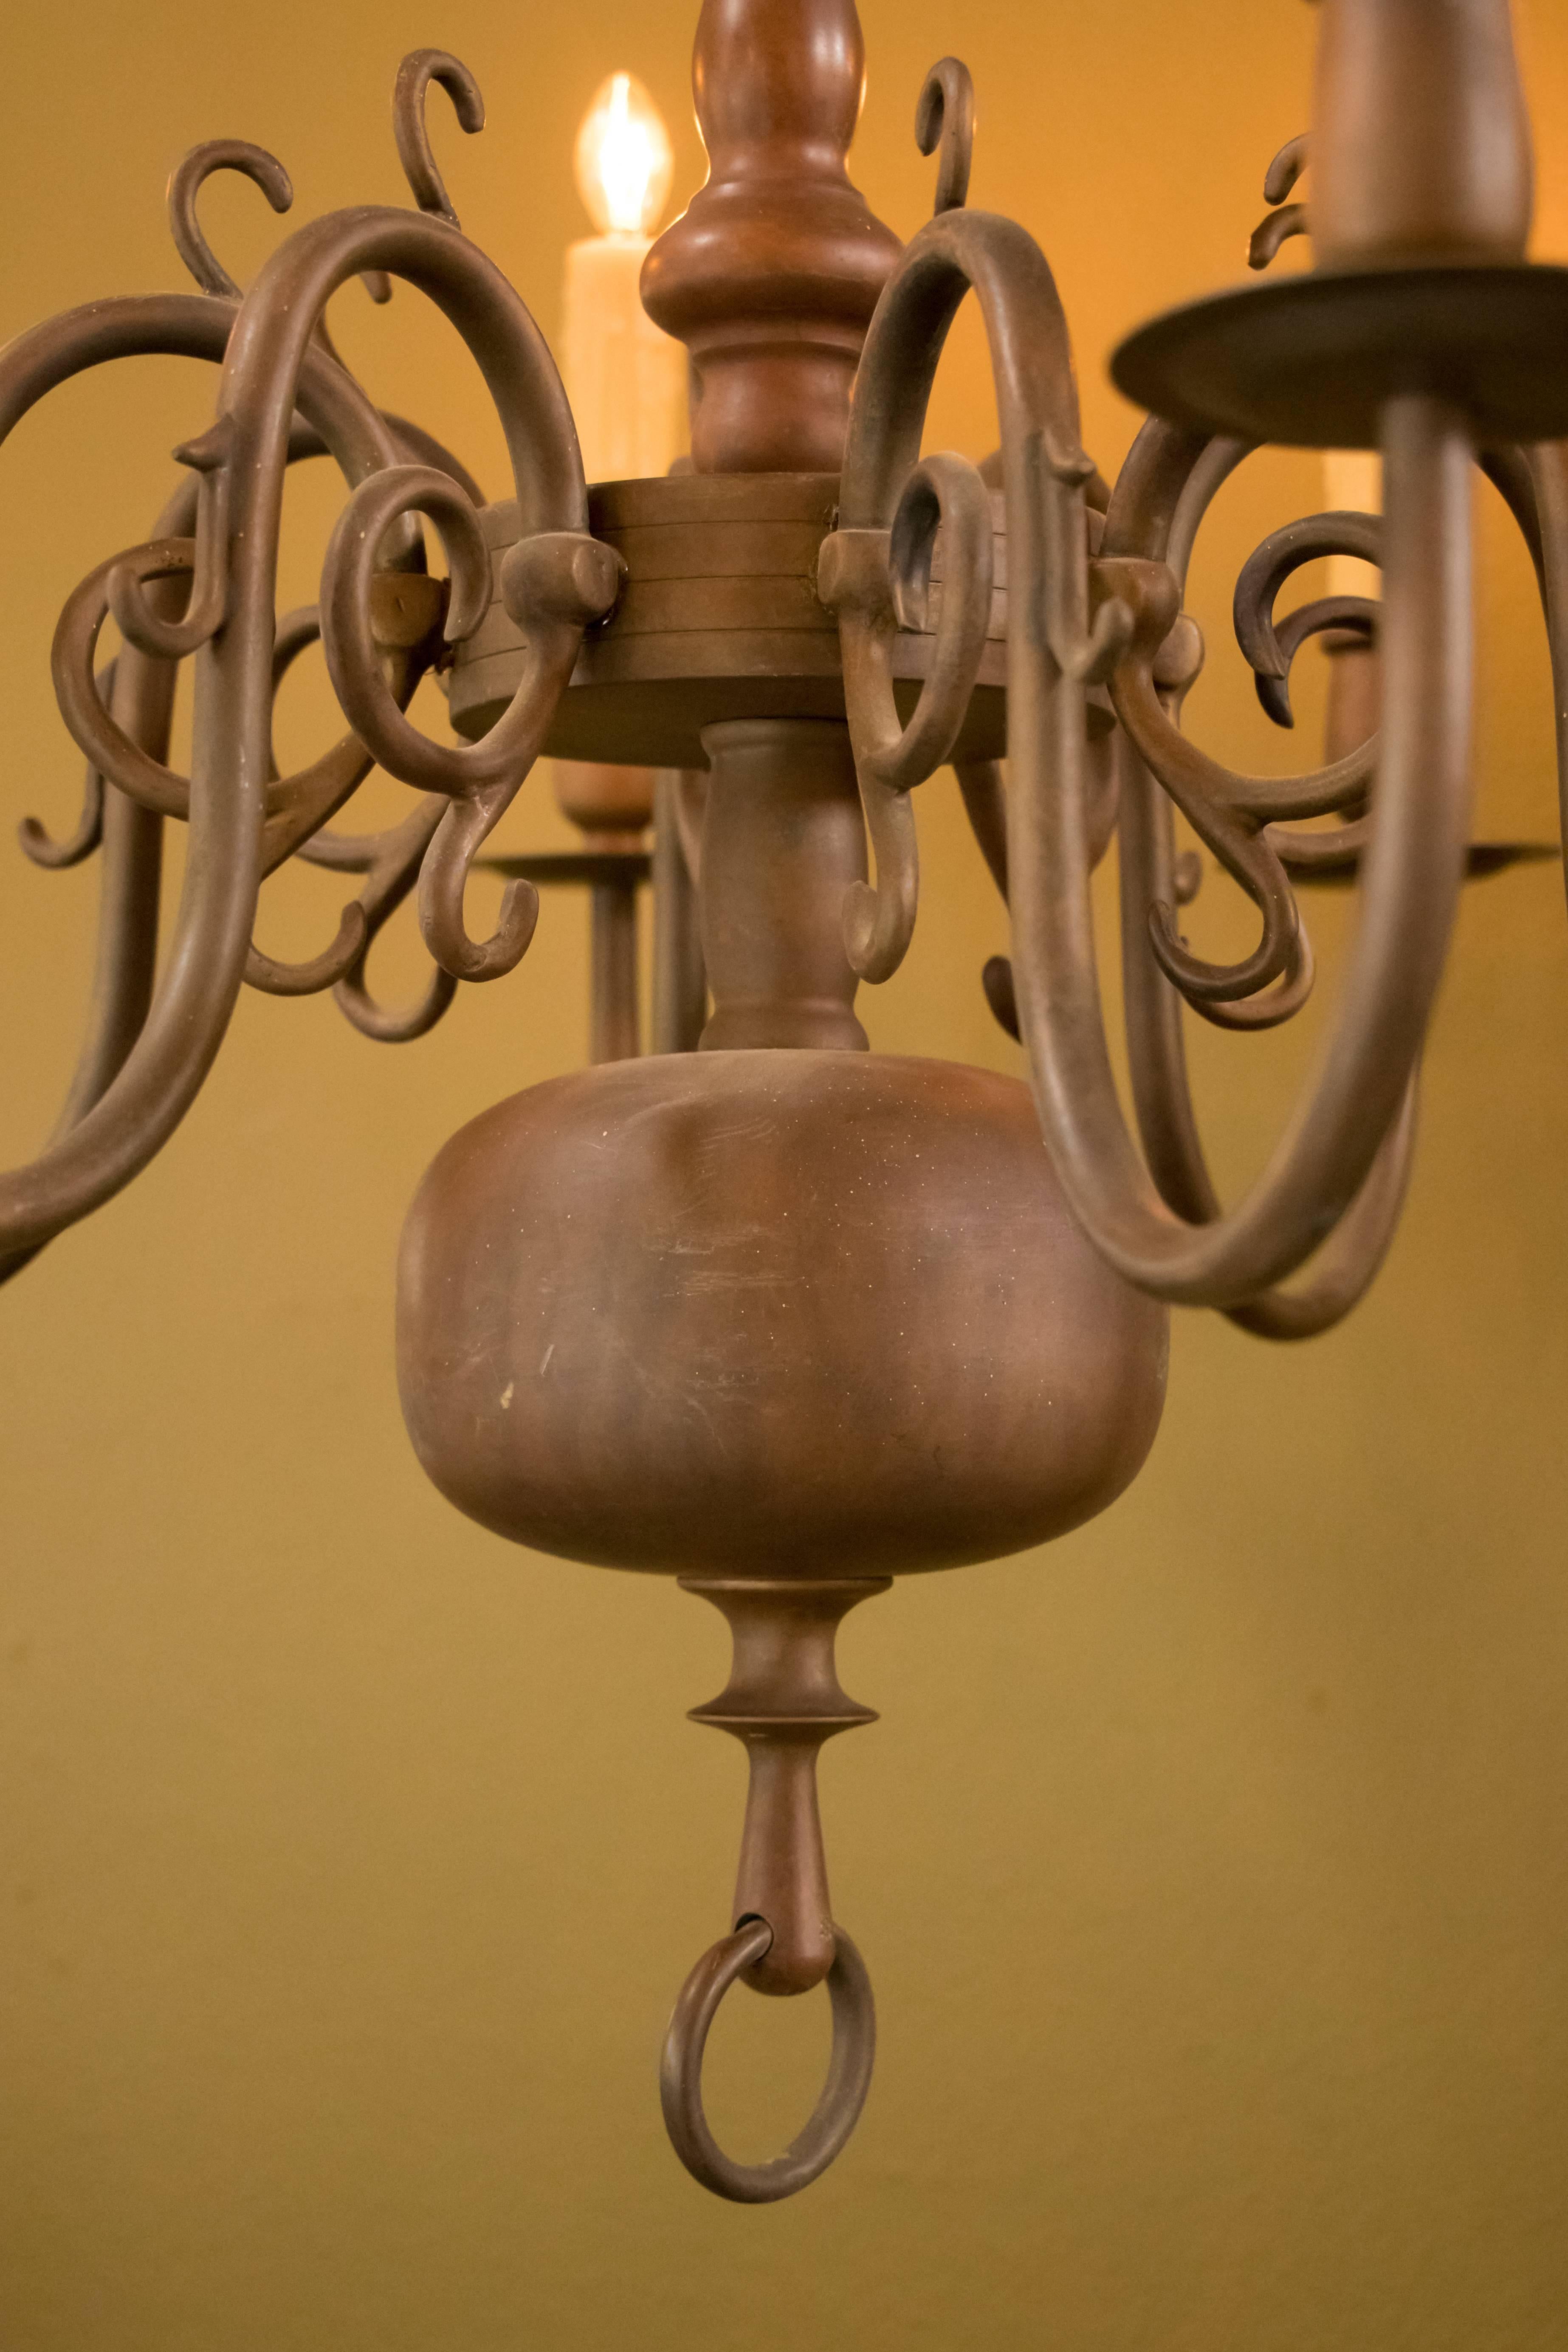 Classic heavy Georgian style bronze chandelier with beautiful squashed spherical bottom from Belgium (circa 1910). Beautiful warm brown aged patina on bronze. Newly wired for use within the USA with all UL listed parts and eight candelabra-size